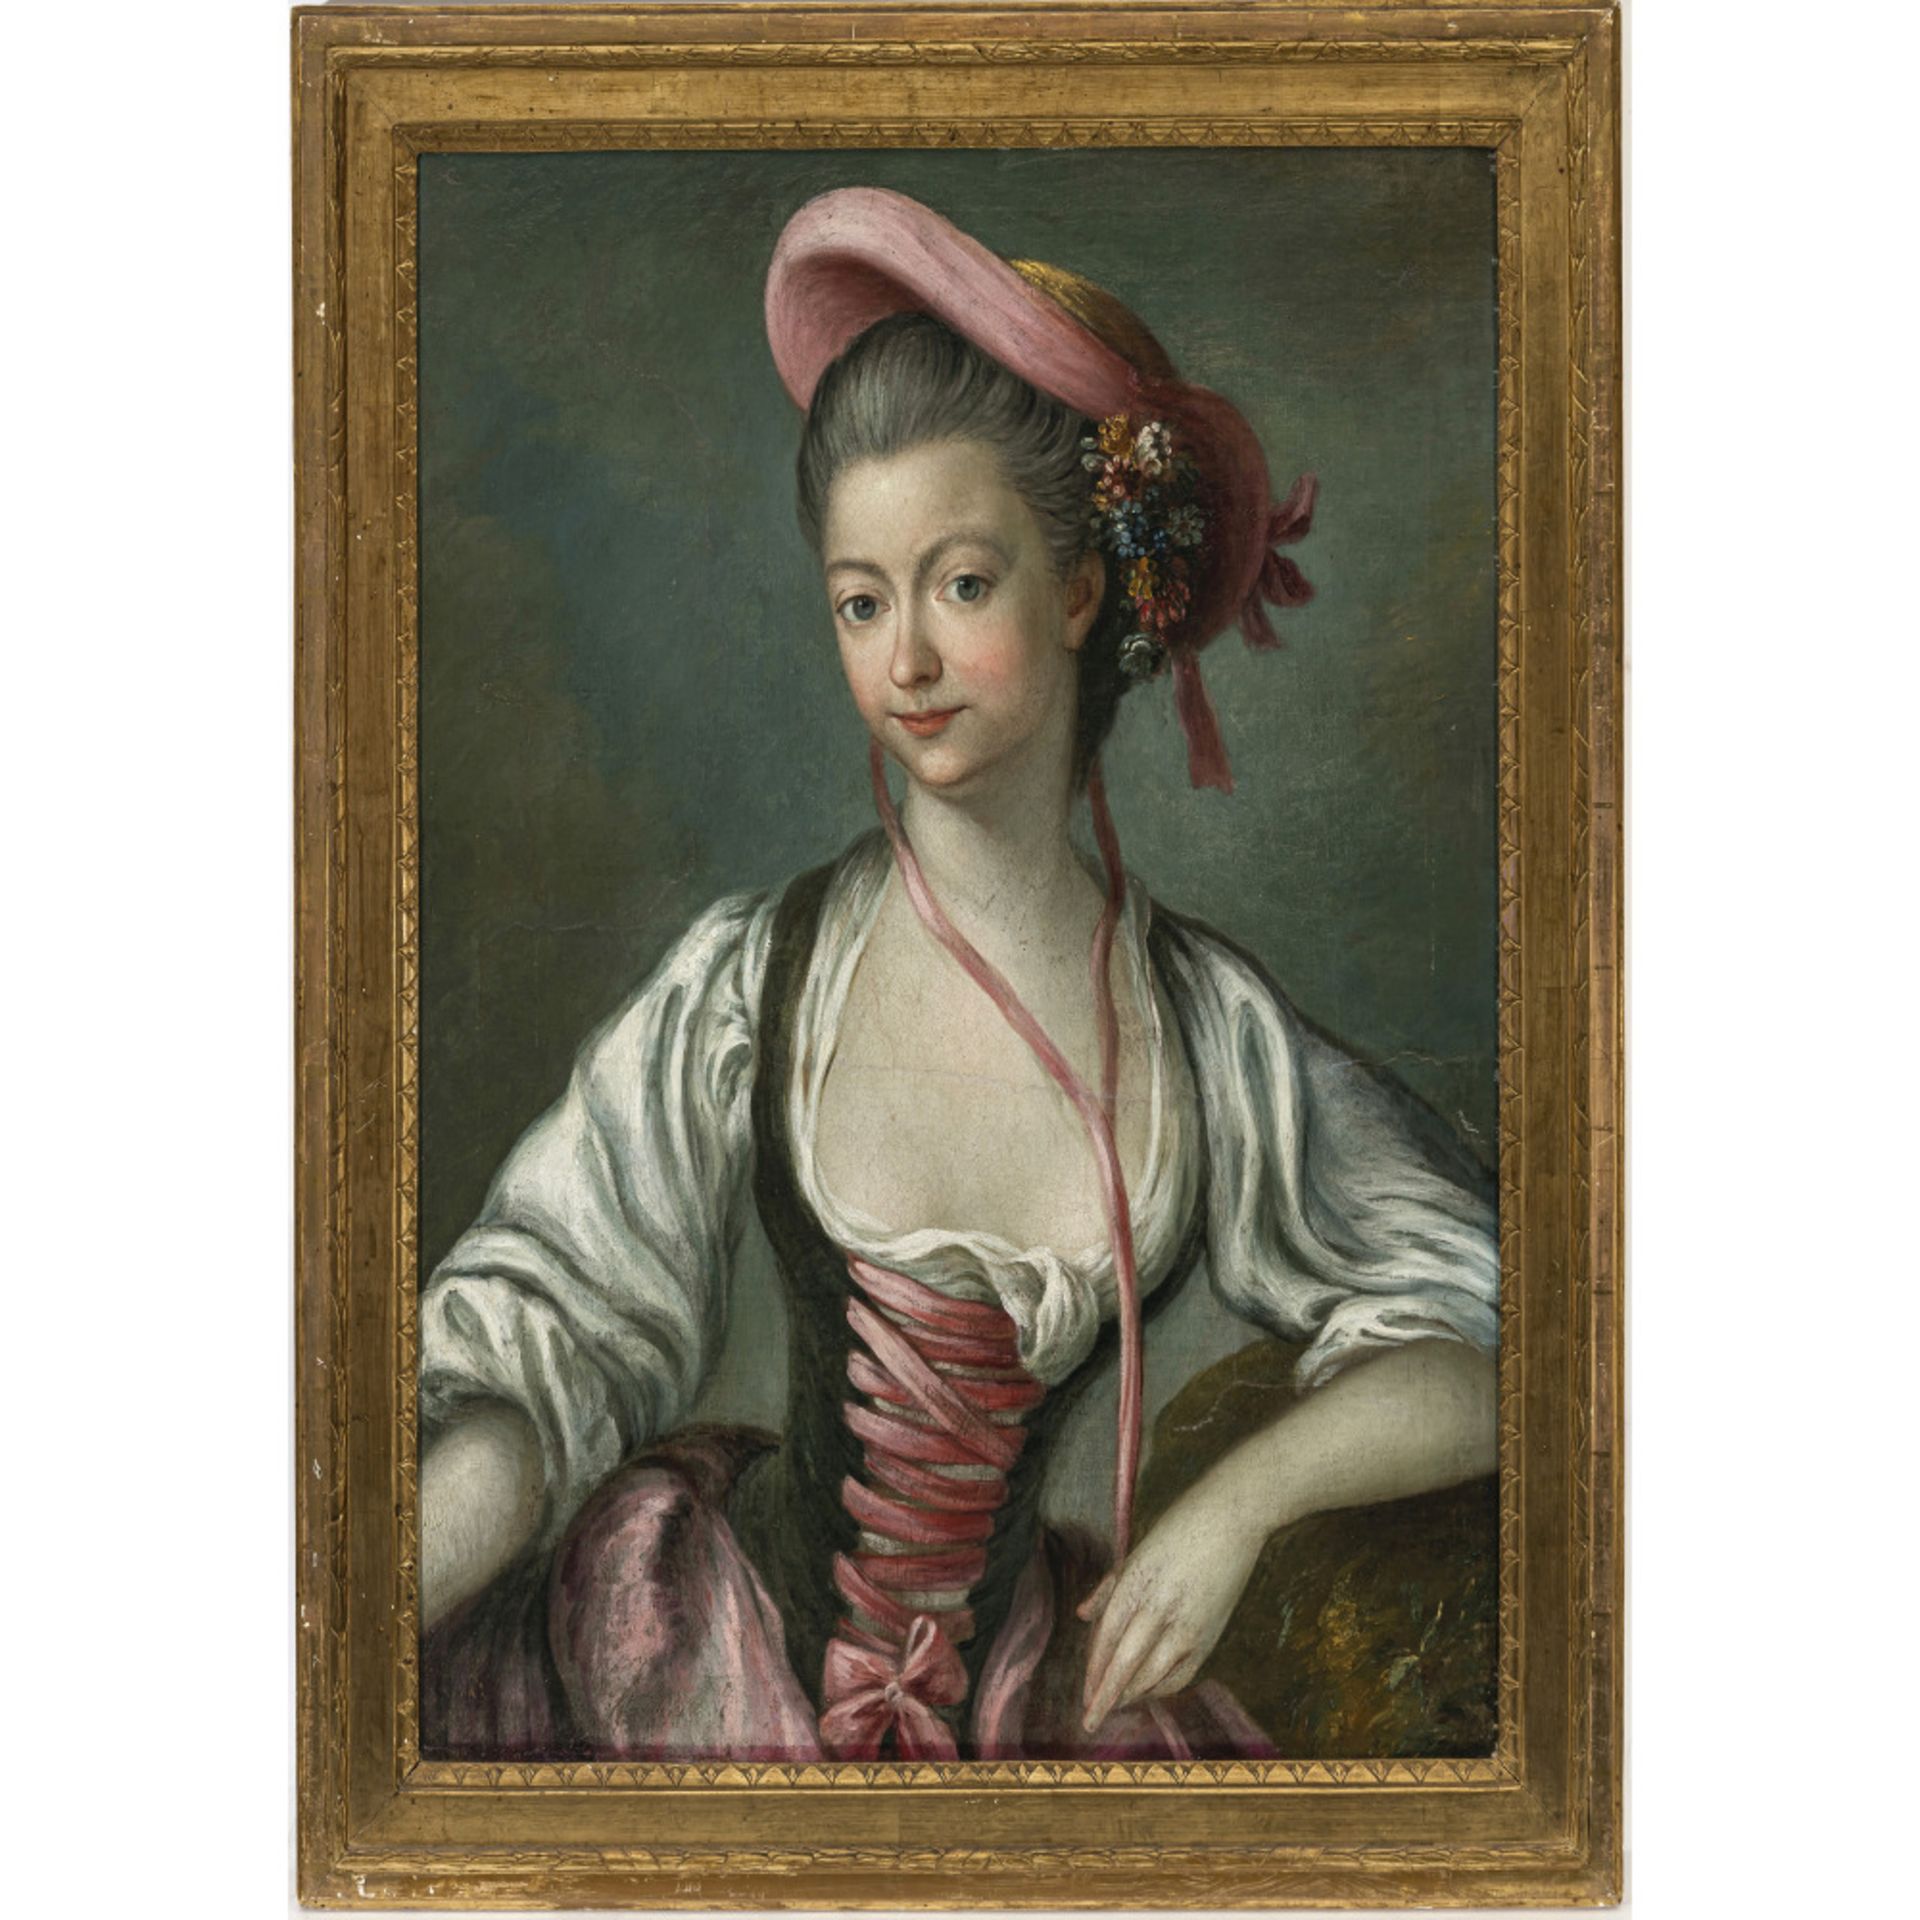 Unbekannt 18th century - Seated young shepherdess - Image 2 of 2